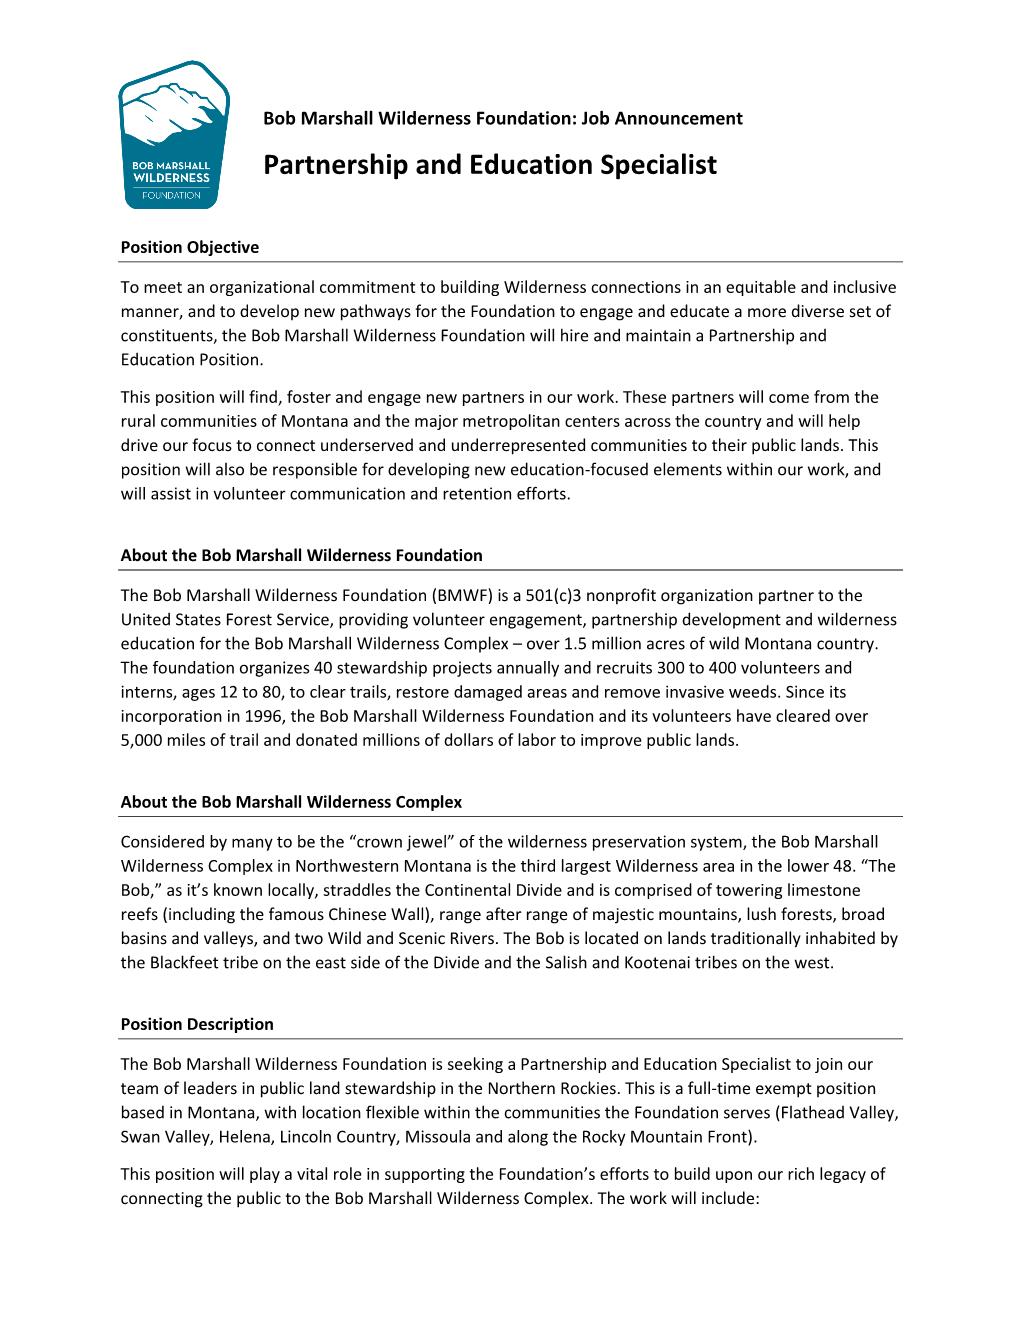 Partnership and Education Specialist